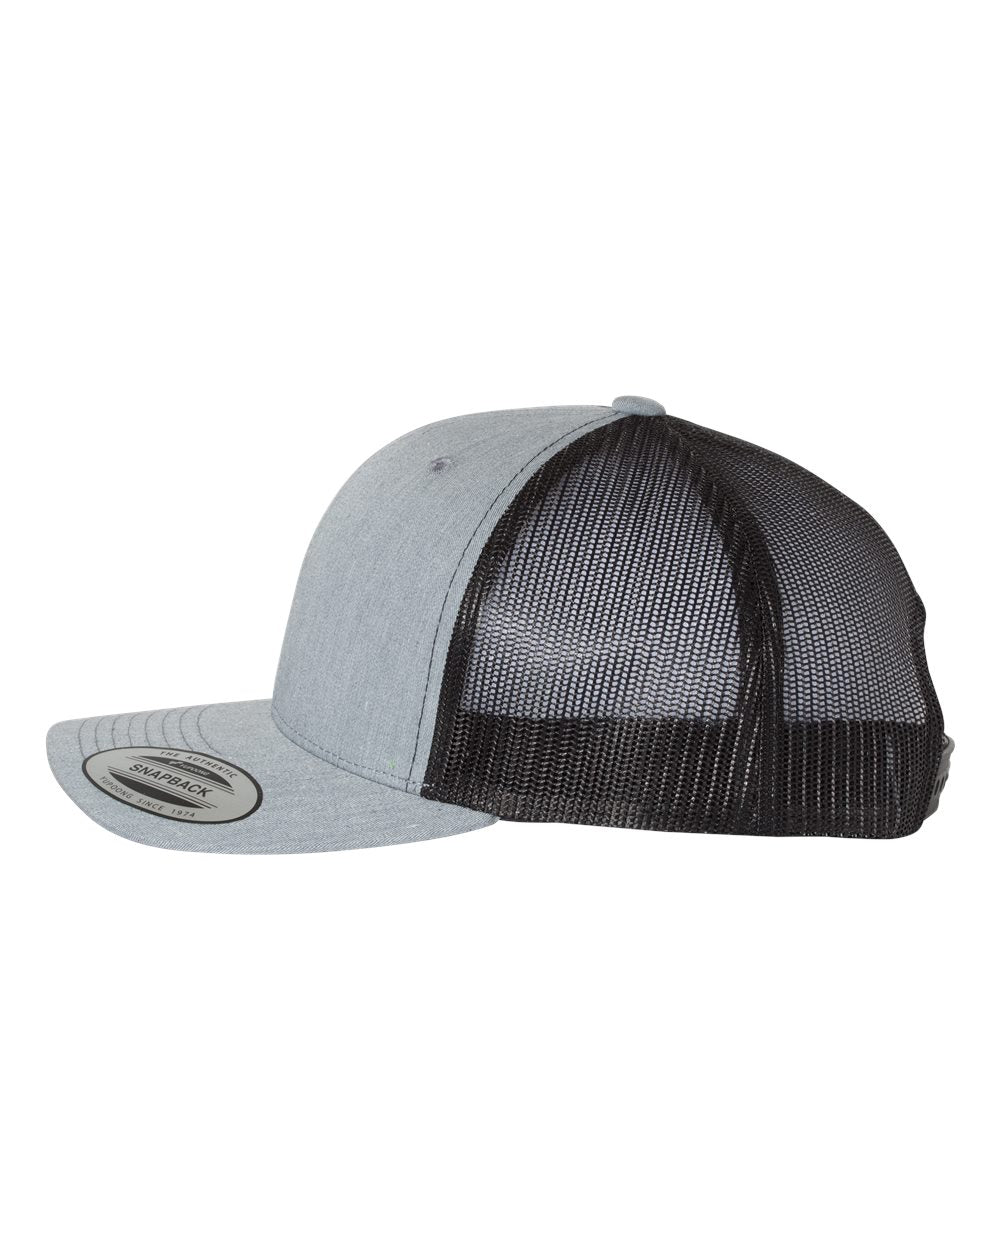 Swag Trucker Hat Grey with Black Mesh